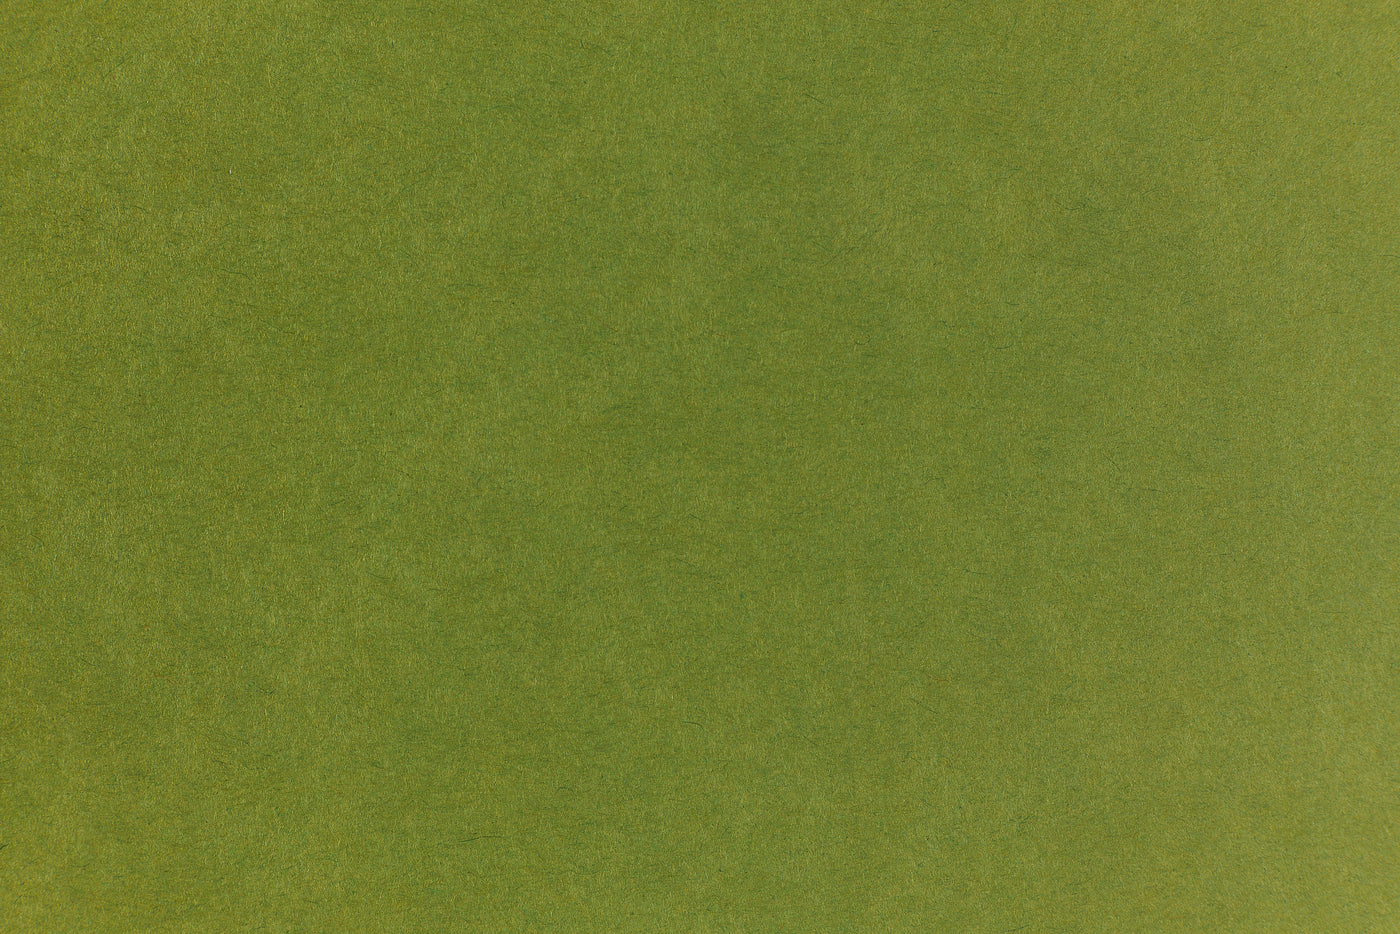 Candy green crafting paper. 